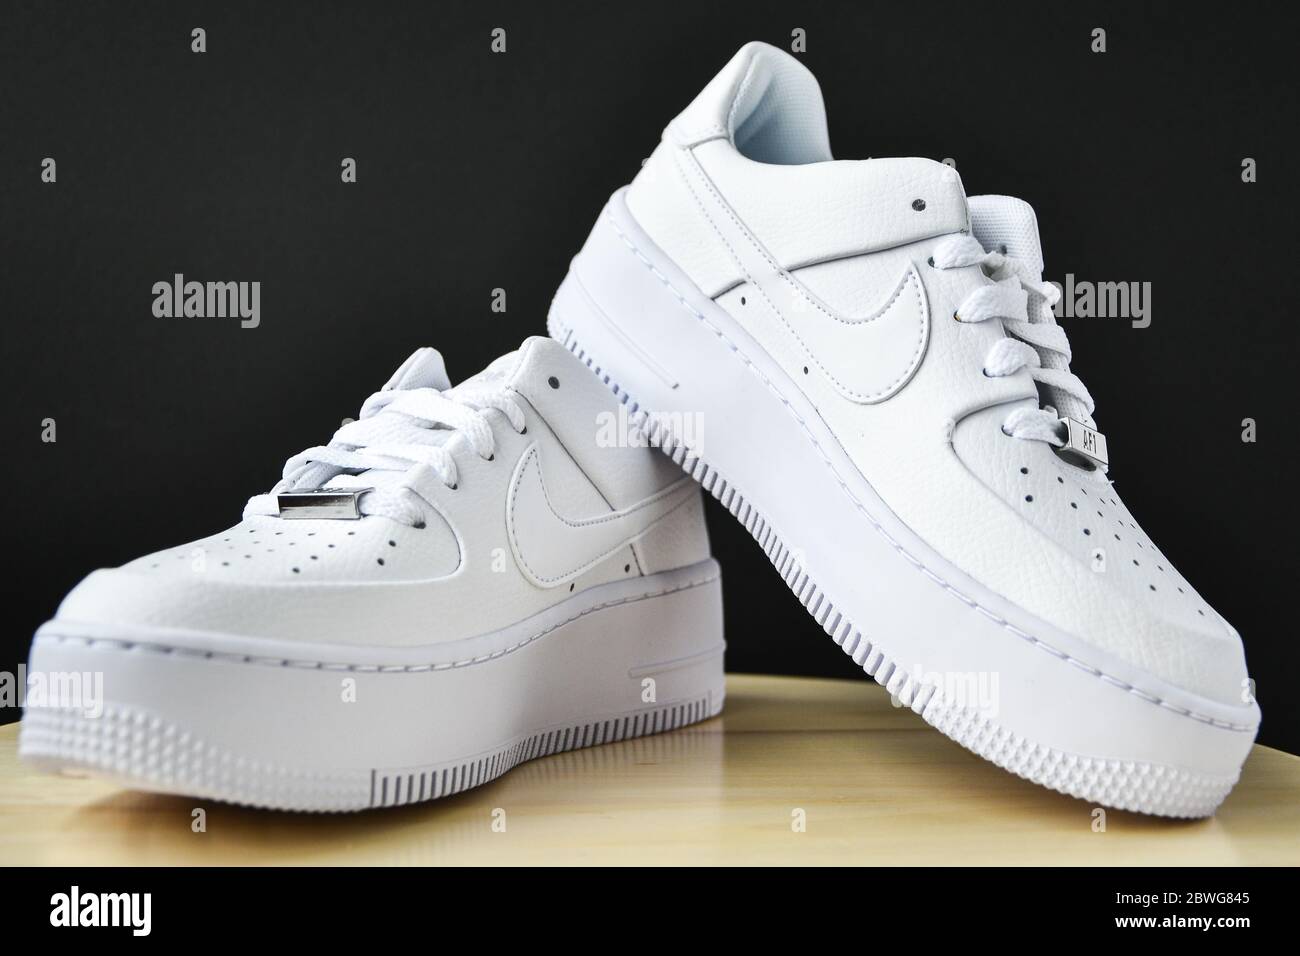 air force one white sneakers